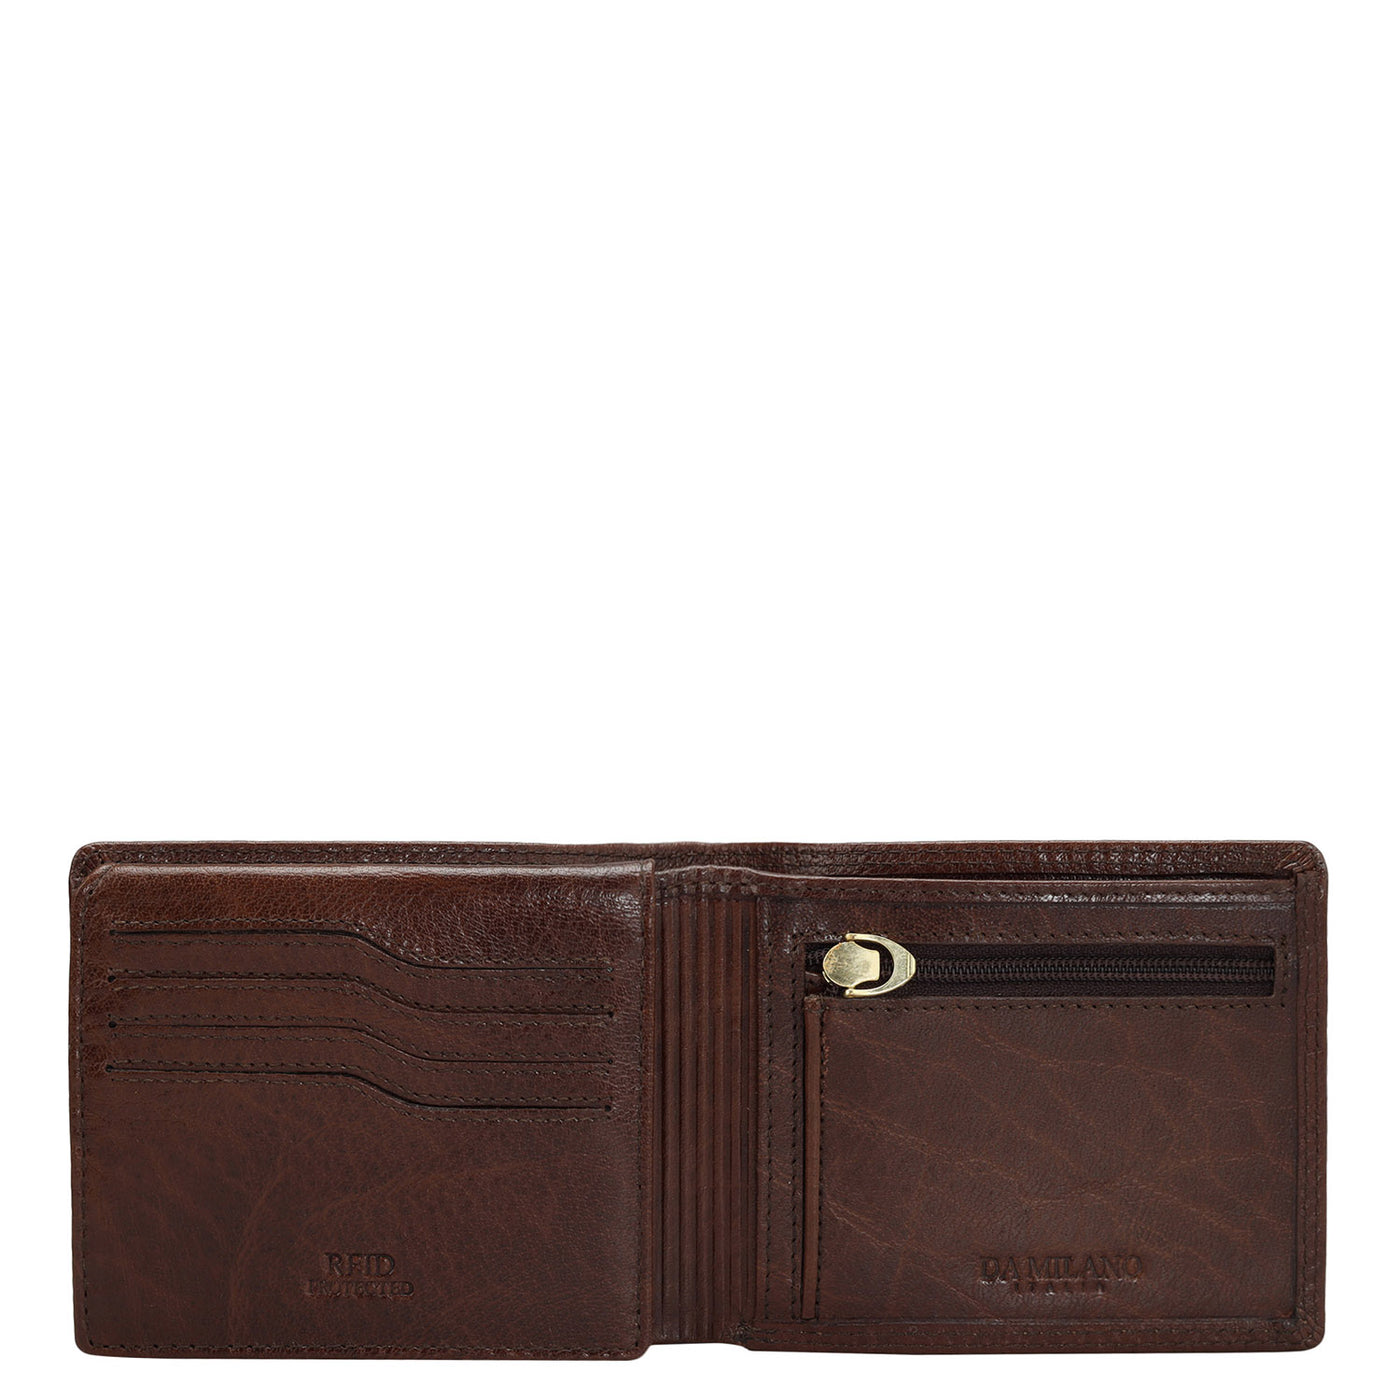 Elephant Pattern Leather Mens Wallet - Brown